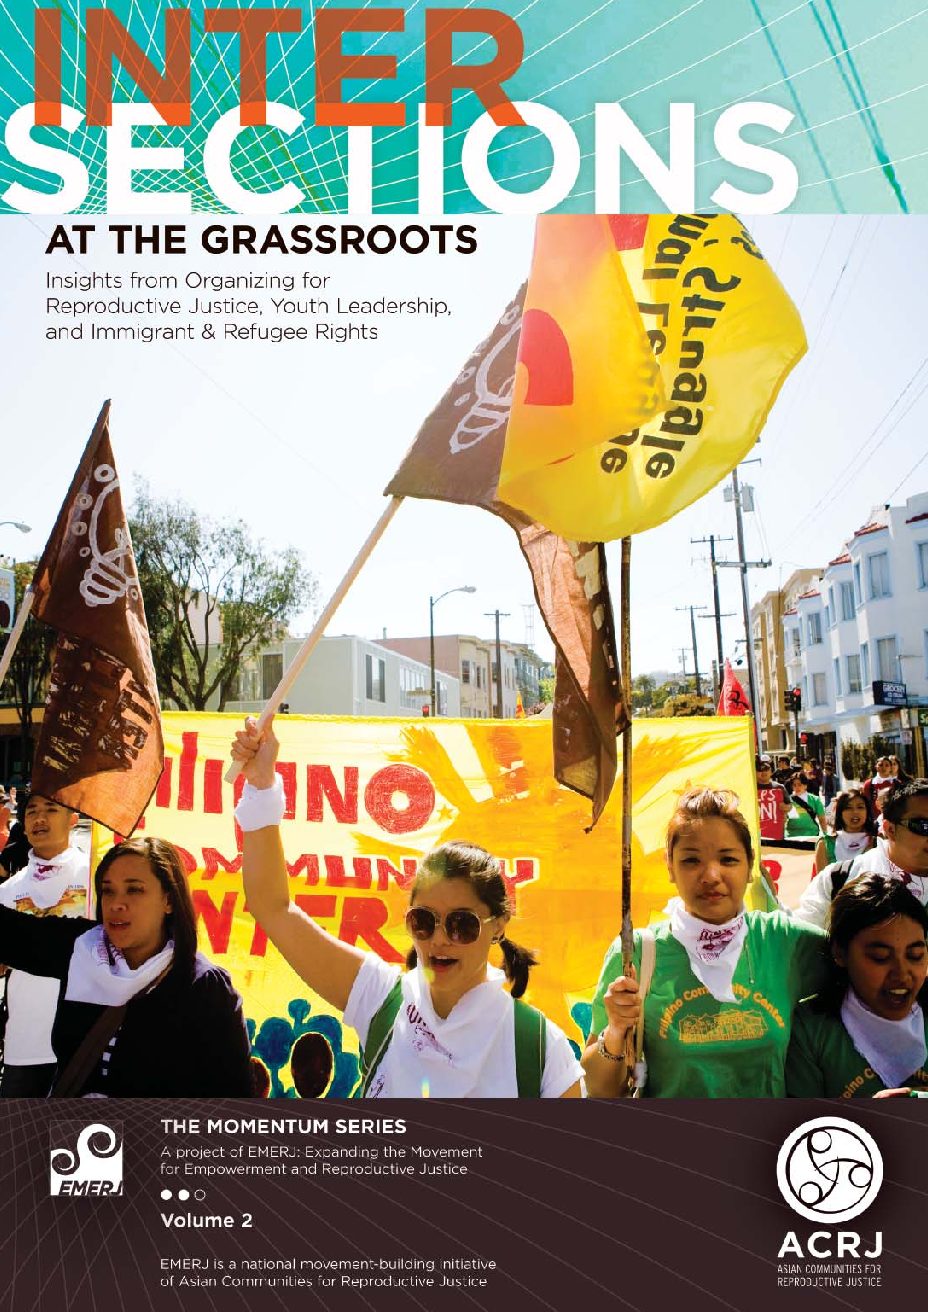 Intersections at the Grassroots